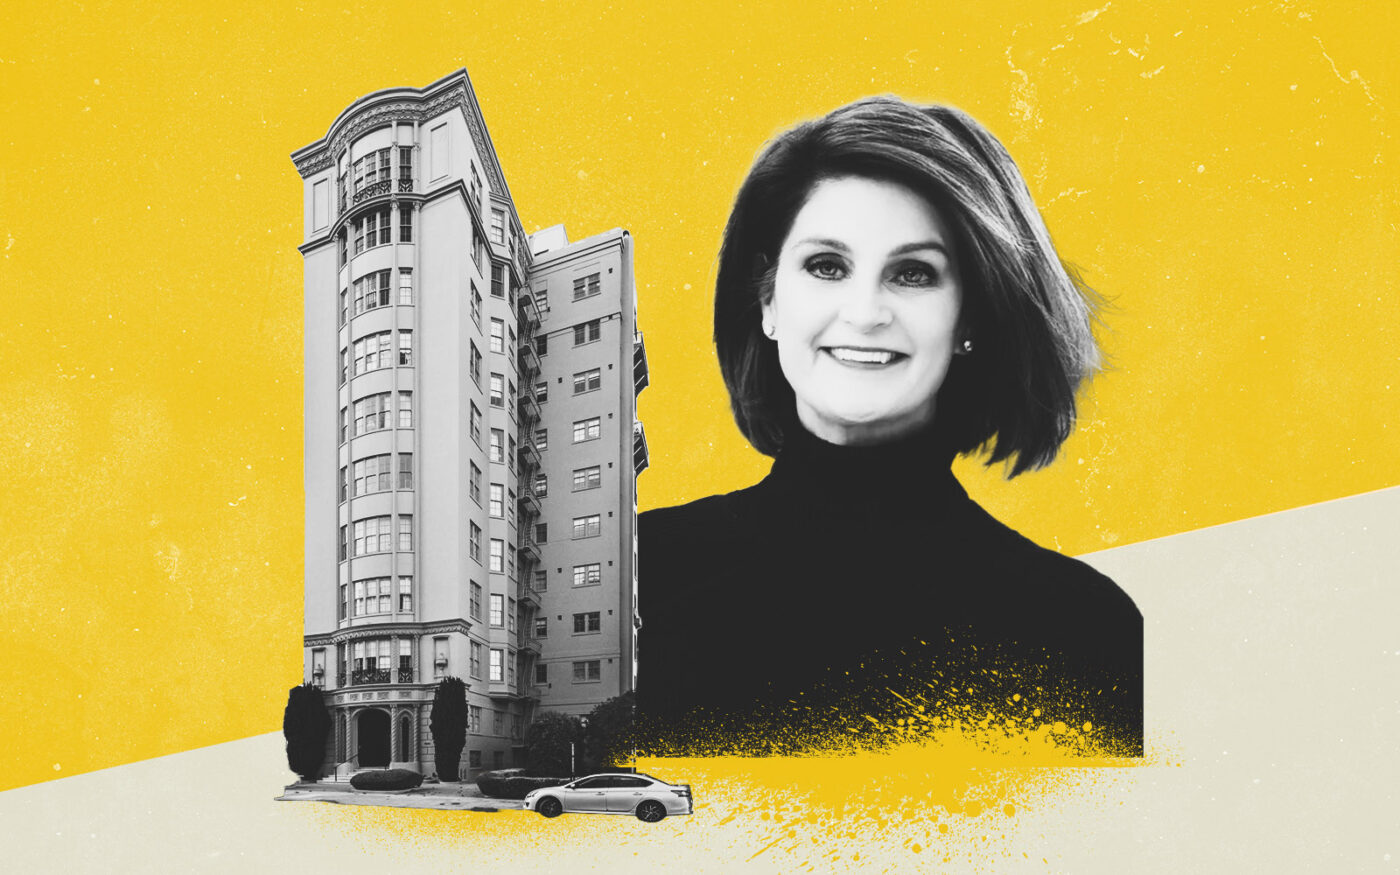 1960 Broadway and Sotheby's International Realty's Deborah Svoboda (Getty, Sotheby's International Realty, Lunghi Studio)